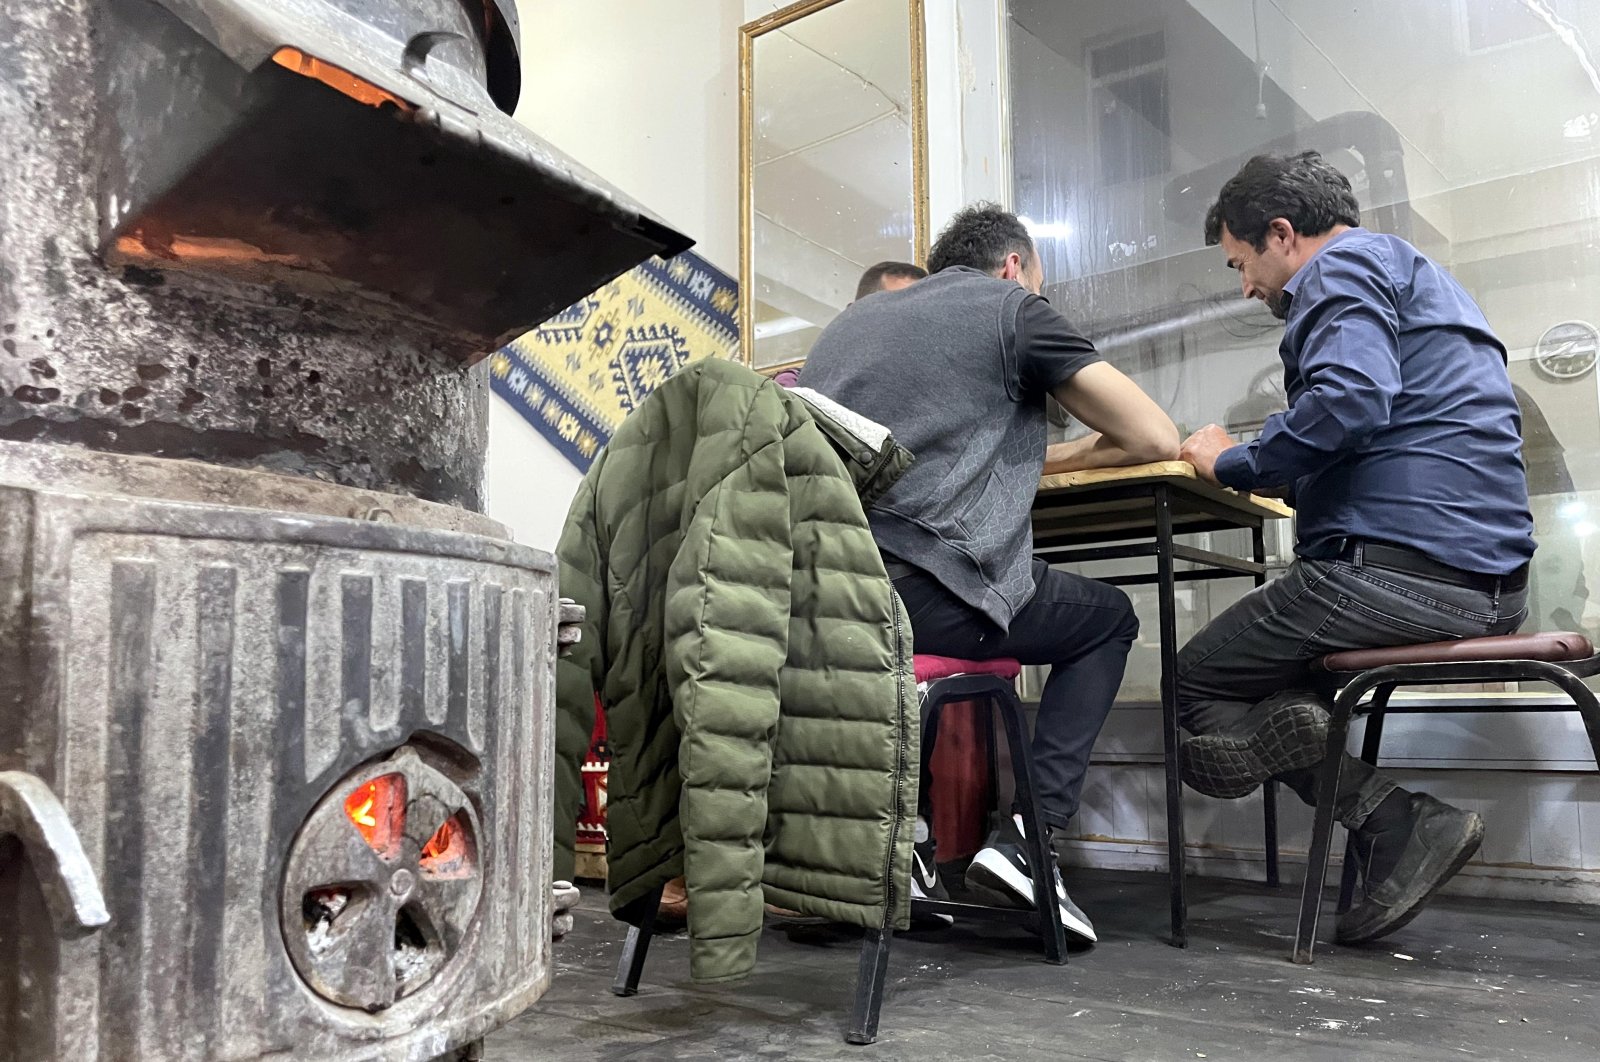 People sit next to a stove in a coffeehouse, in Ardahan, northeastern Turkey, Aug. 5, 2022. (AA PHOTO)